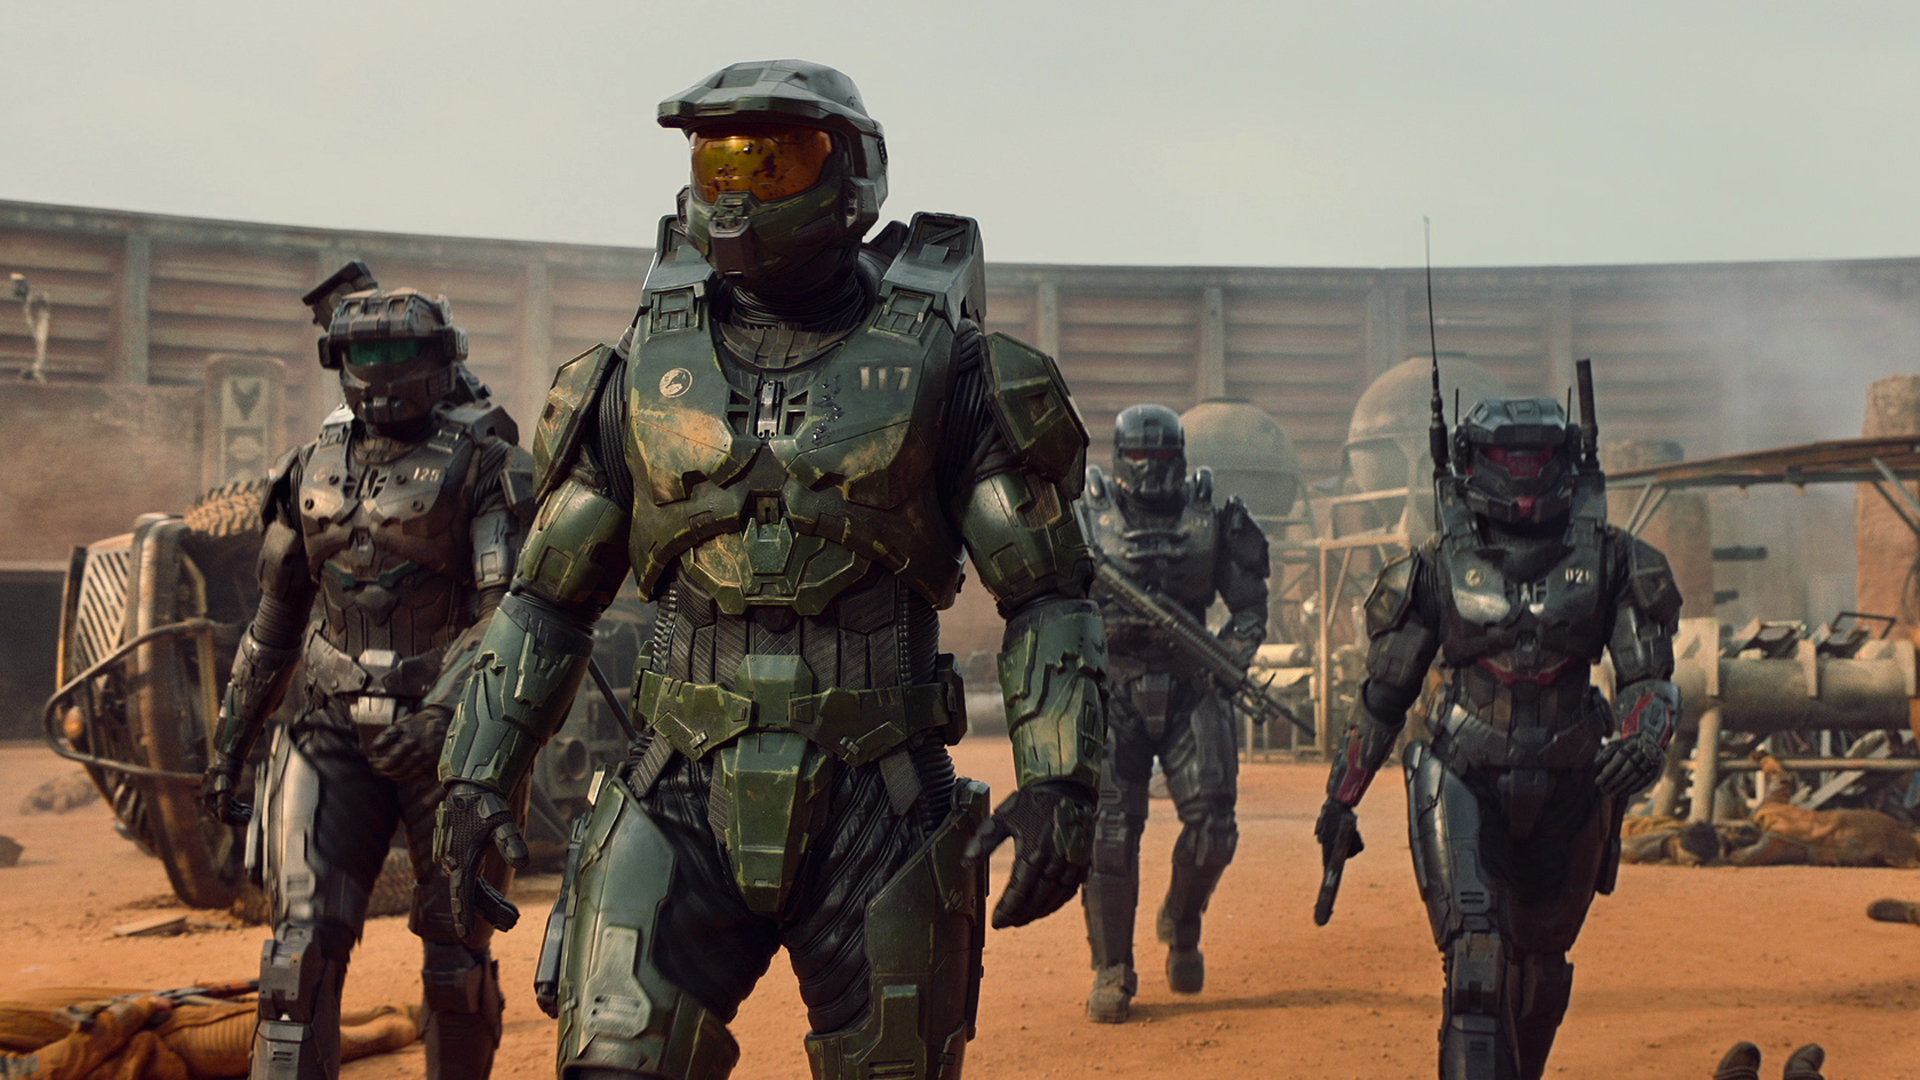 Master Chief and Silver Team on a mission in the Halo TV series